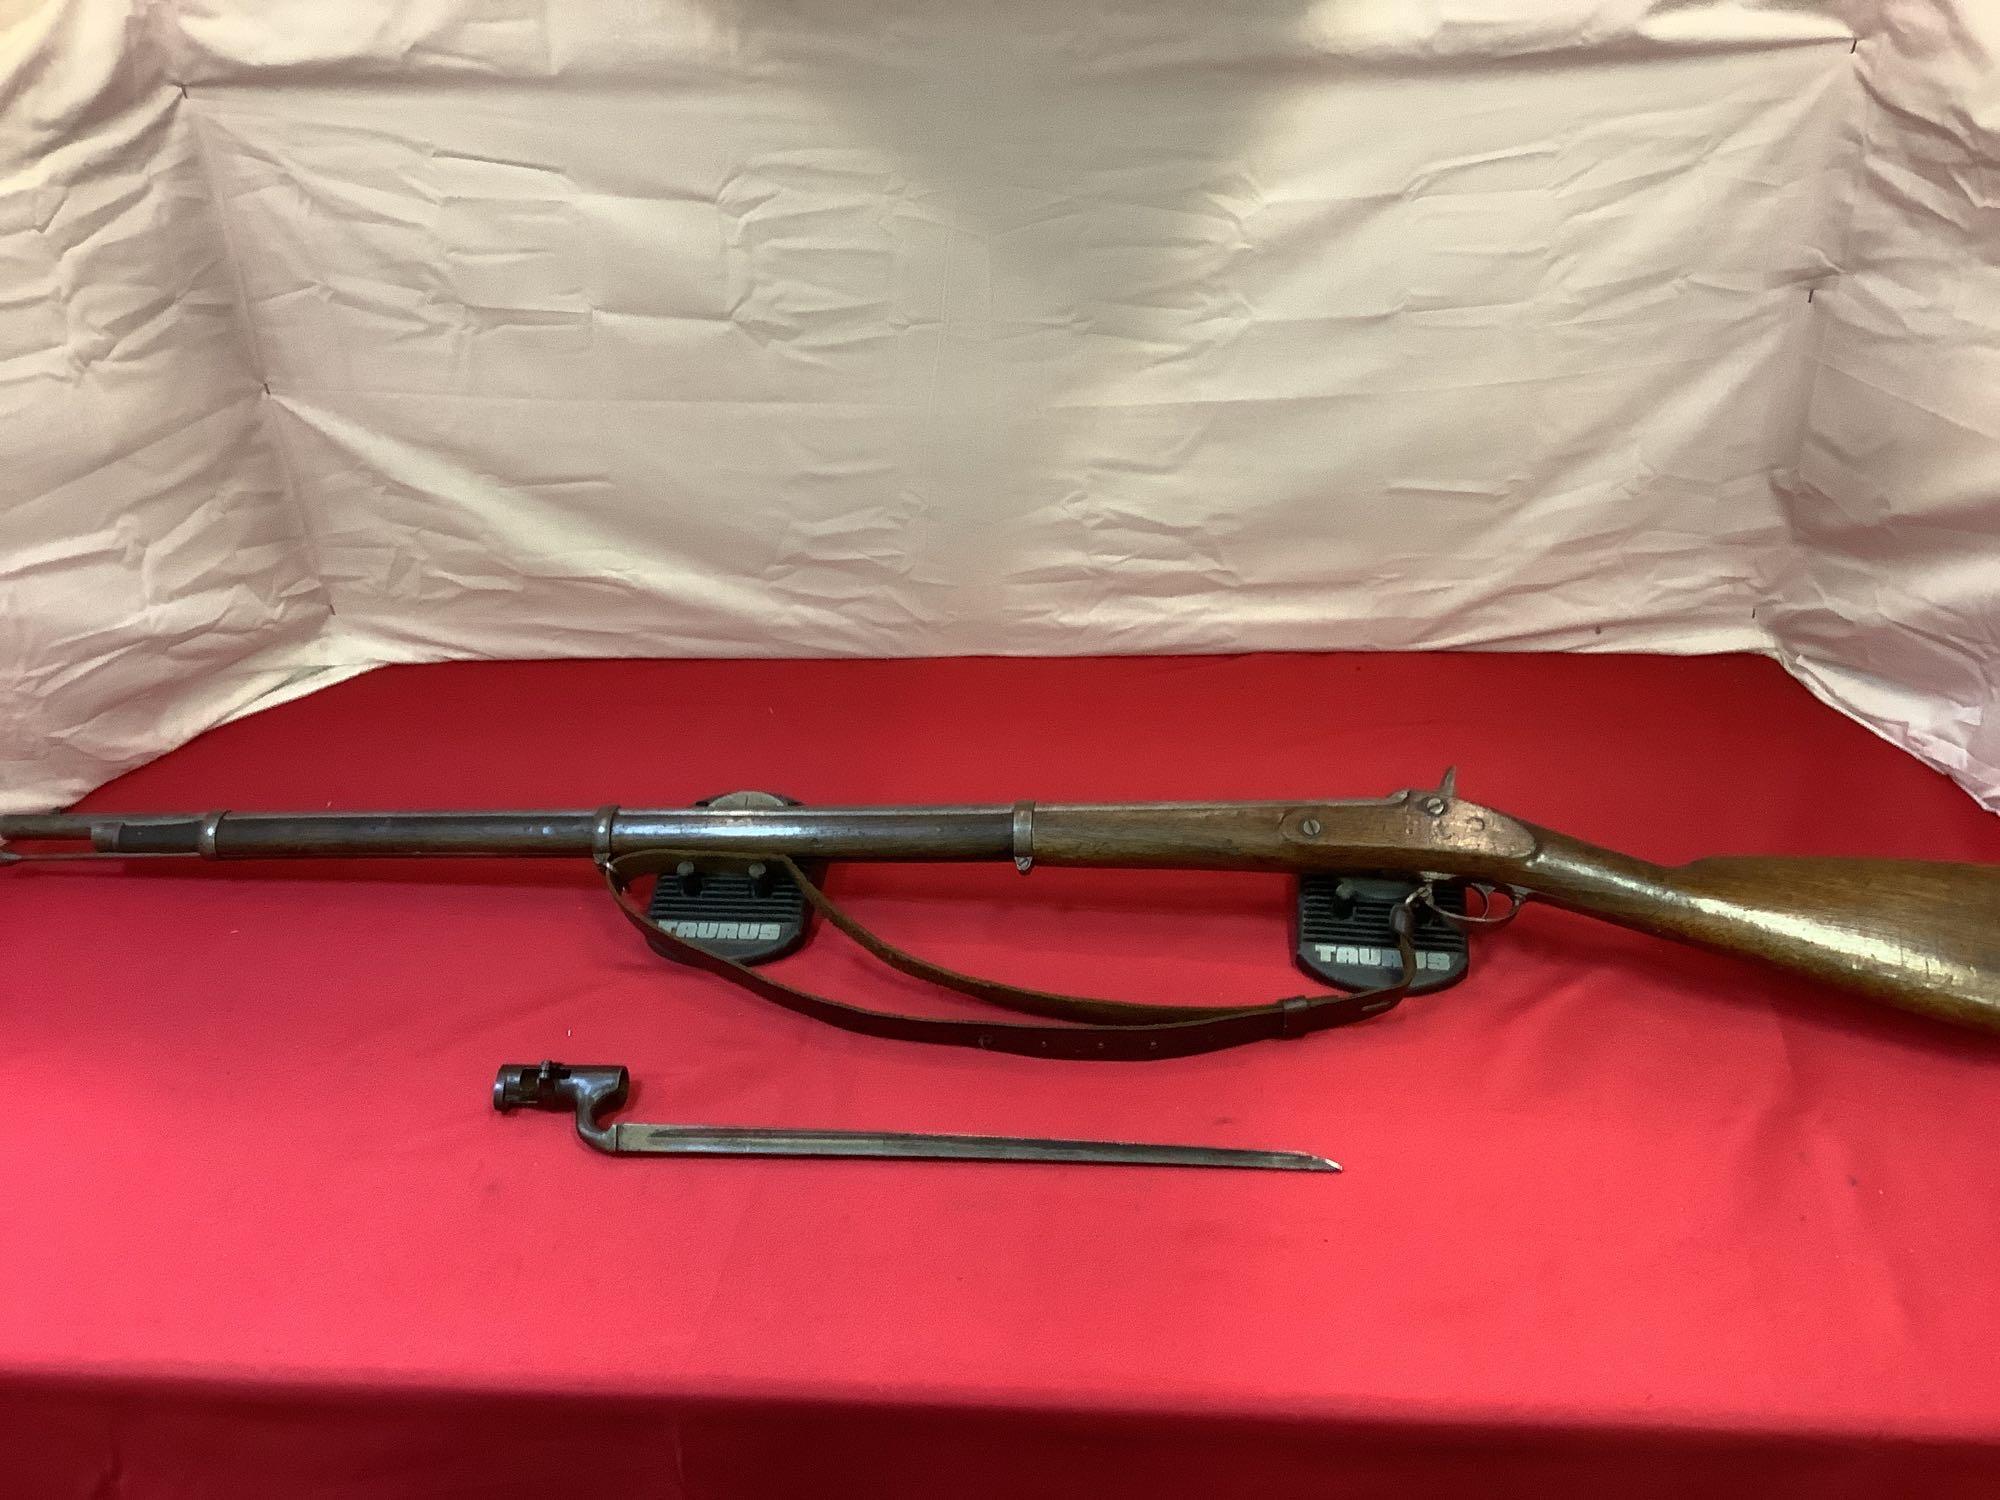 Navy Arms 1864 Rifle